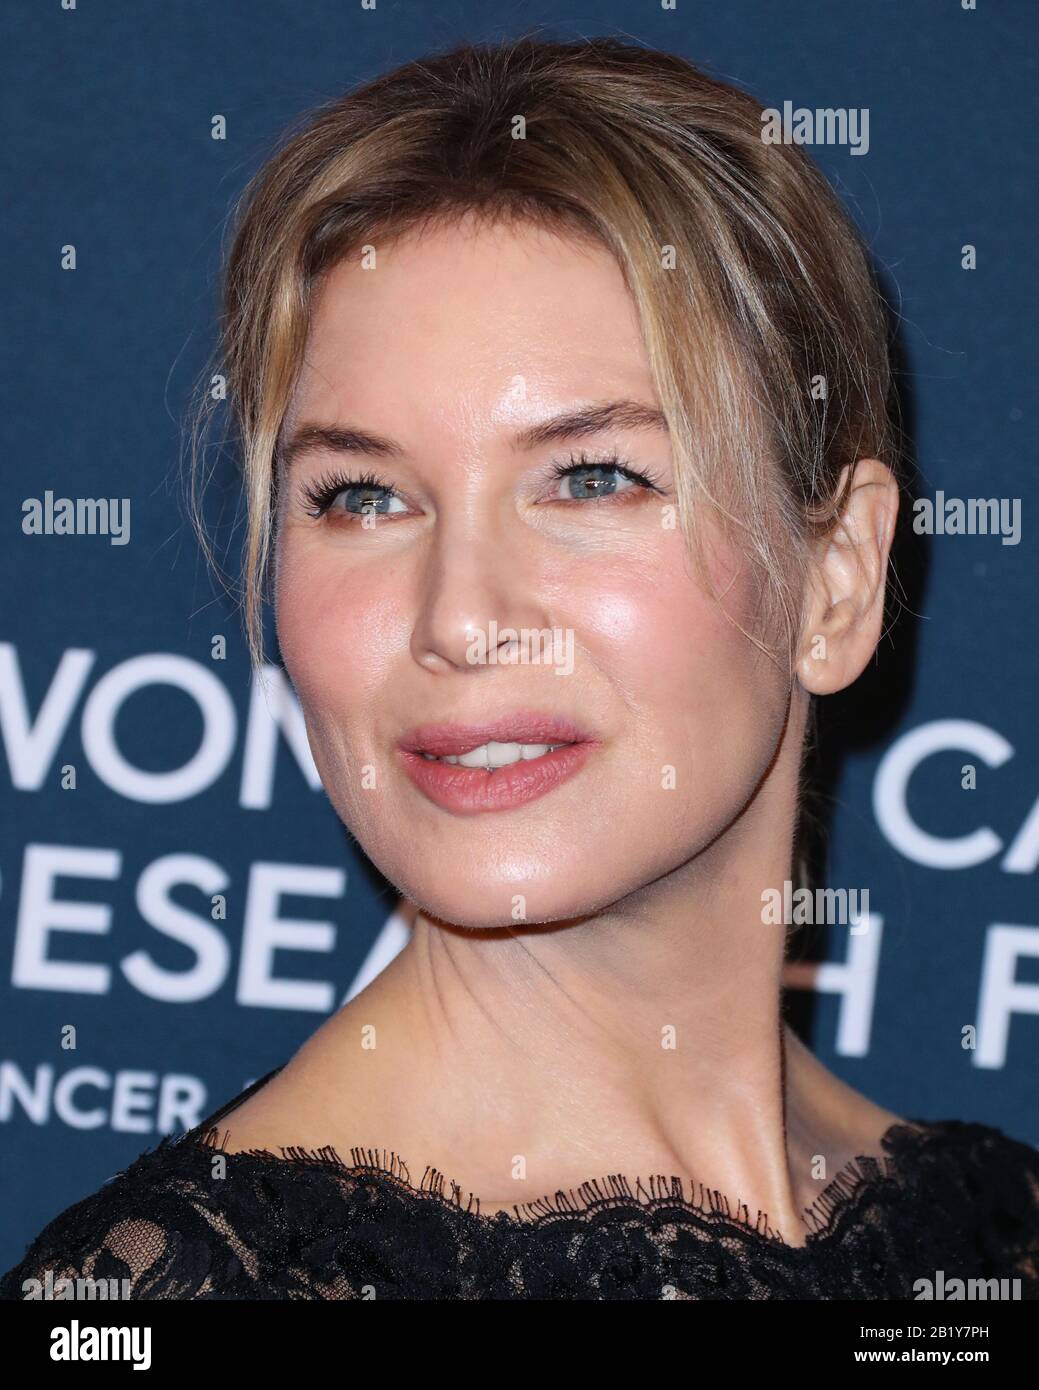 Beverly Hills, United States. 27th Feb, 2020. BEVERLY HILLS, LOS ANGELES, CALIFORNIA, USA - FEBRUARY 27: Actress Renee Zellweger arrives at The Women's Cancer Research Fund's An Unforgettable Evening Benefit Gala 2020 held at the Beverly Wilshire, A Four Seasons Hotel on February 27, 2020 in Beverly Hills, Los Angeles, California, United States. (Photo by Xavier Collin/Image Press Agency) Credit: Image Press Agency/Alamy Live News Stock Photo